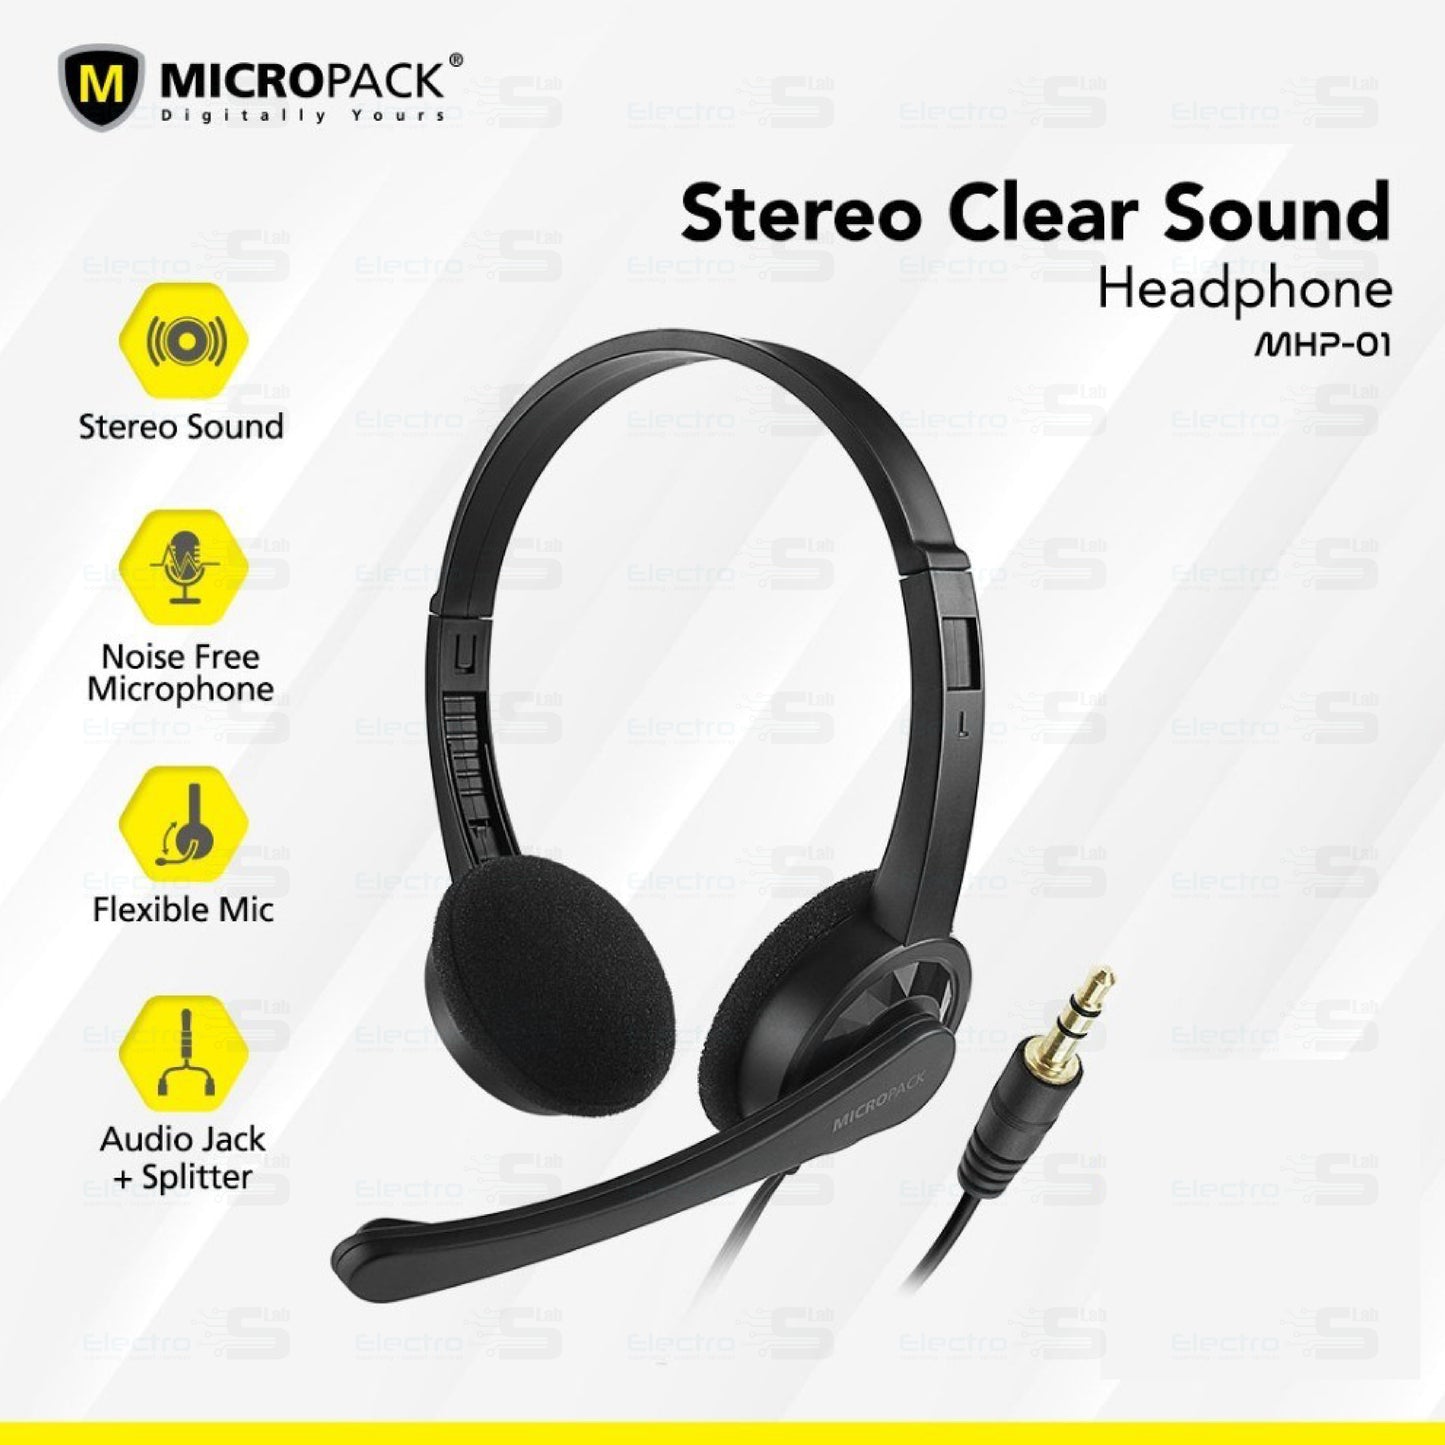 Stereo Sound Headset MHP-01 Micropack